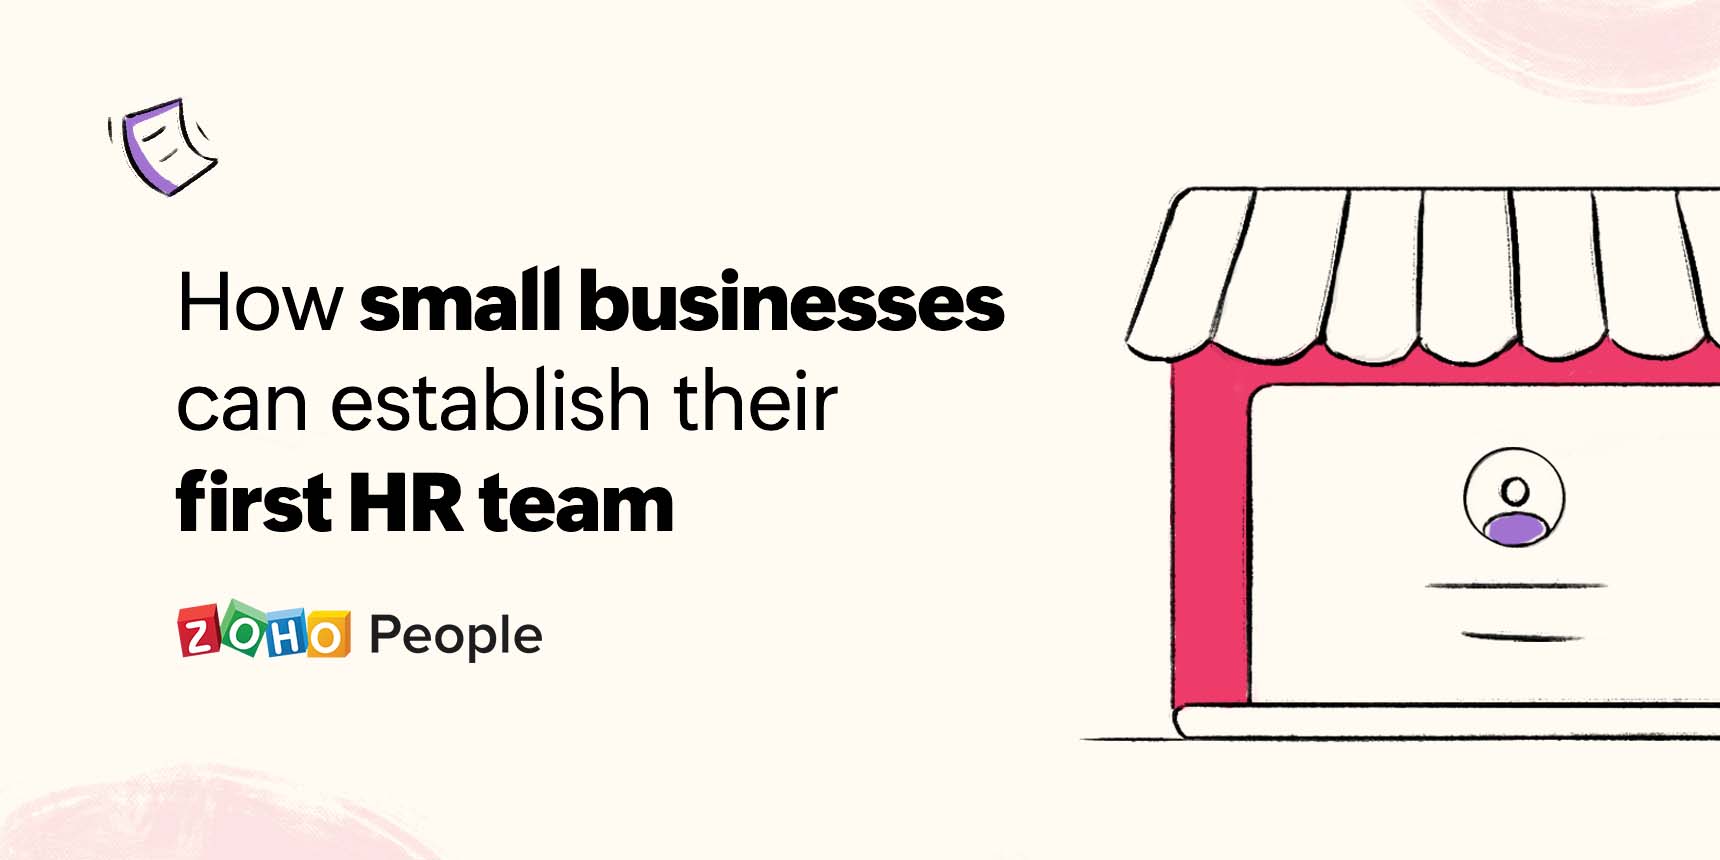 A step-by-step guide to establishing an HR team for your small business